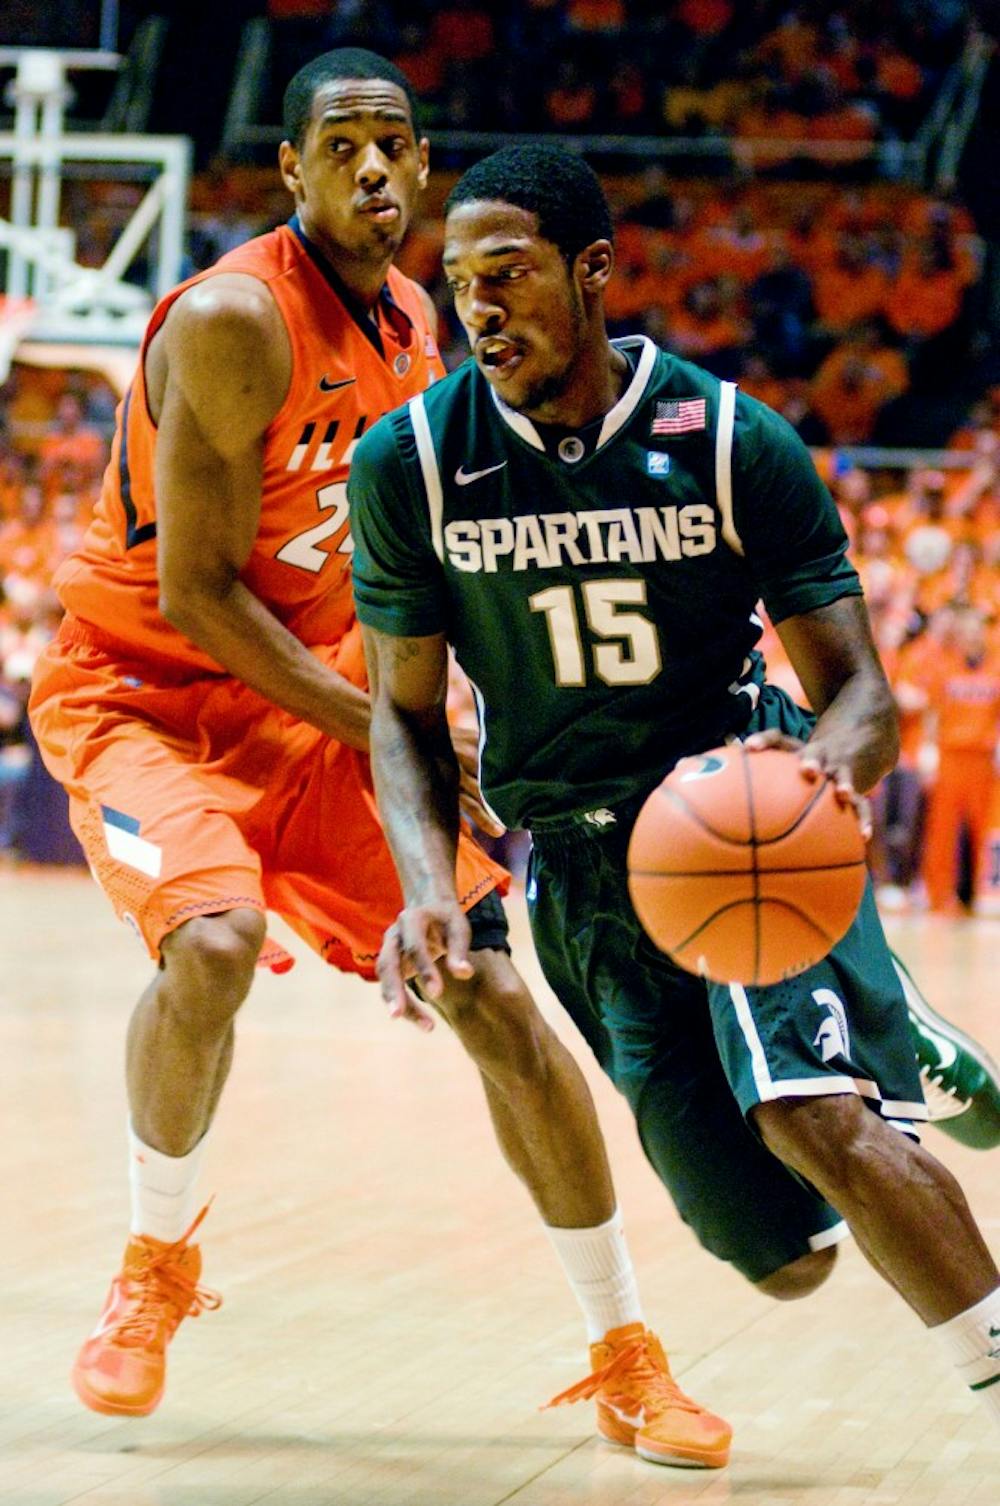 Senior guard Durrell Summers takes the ball toward the net during the Spartans' game against Illinois Tuesday at Assembly Hall in Champaign, Ill.